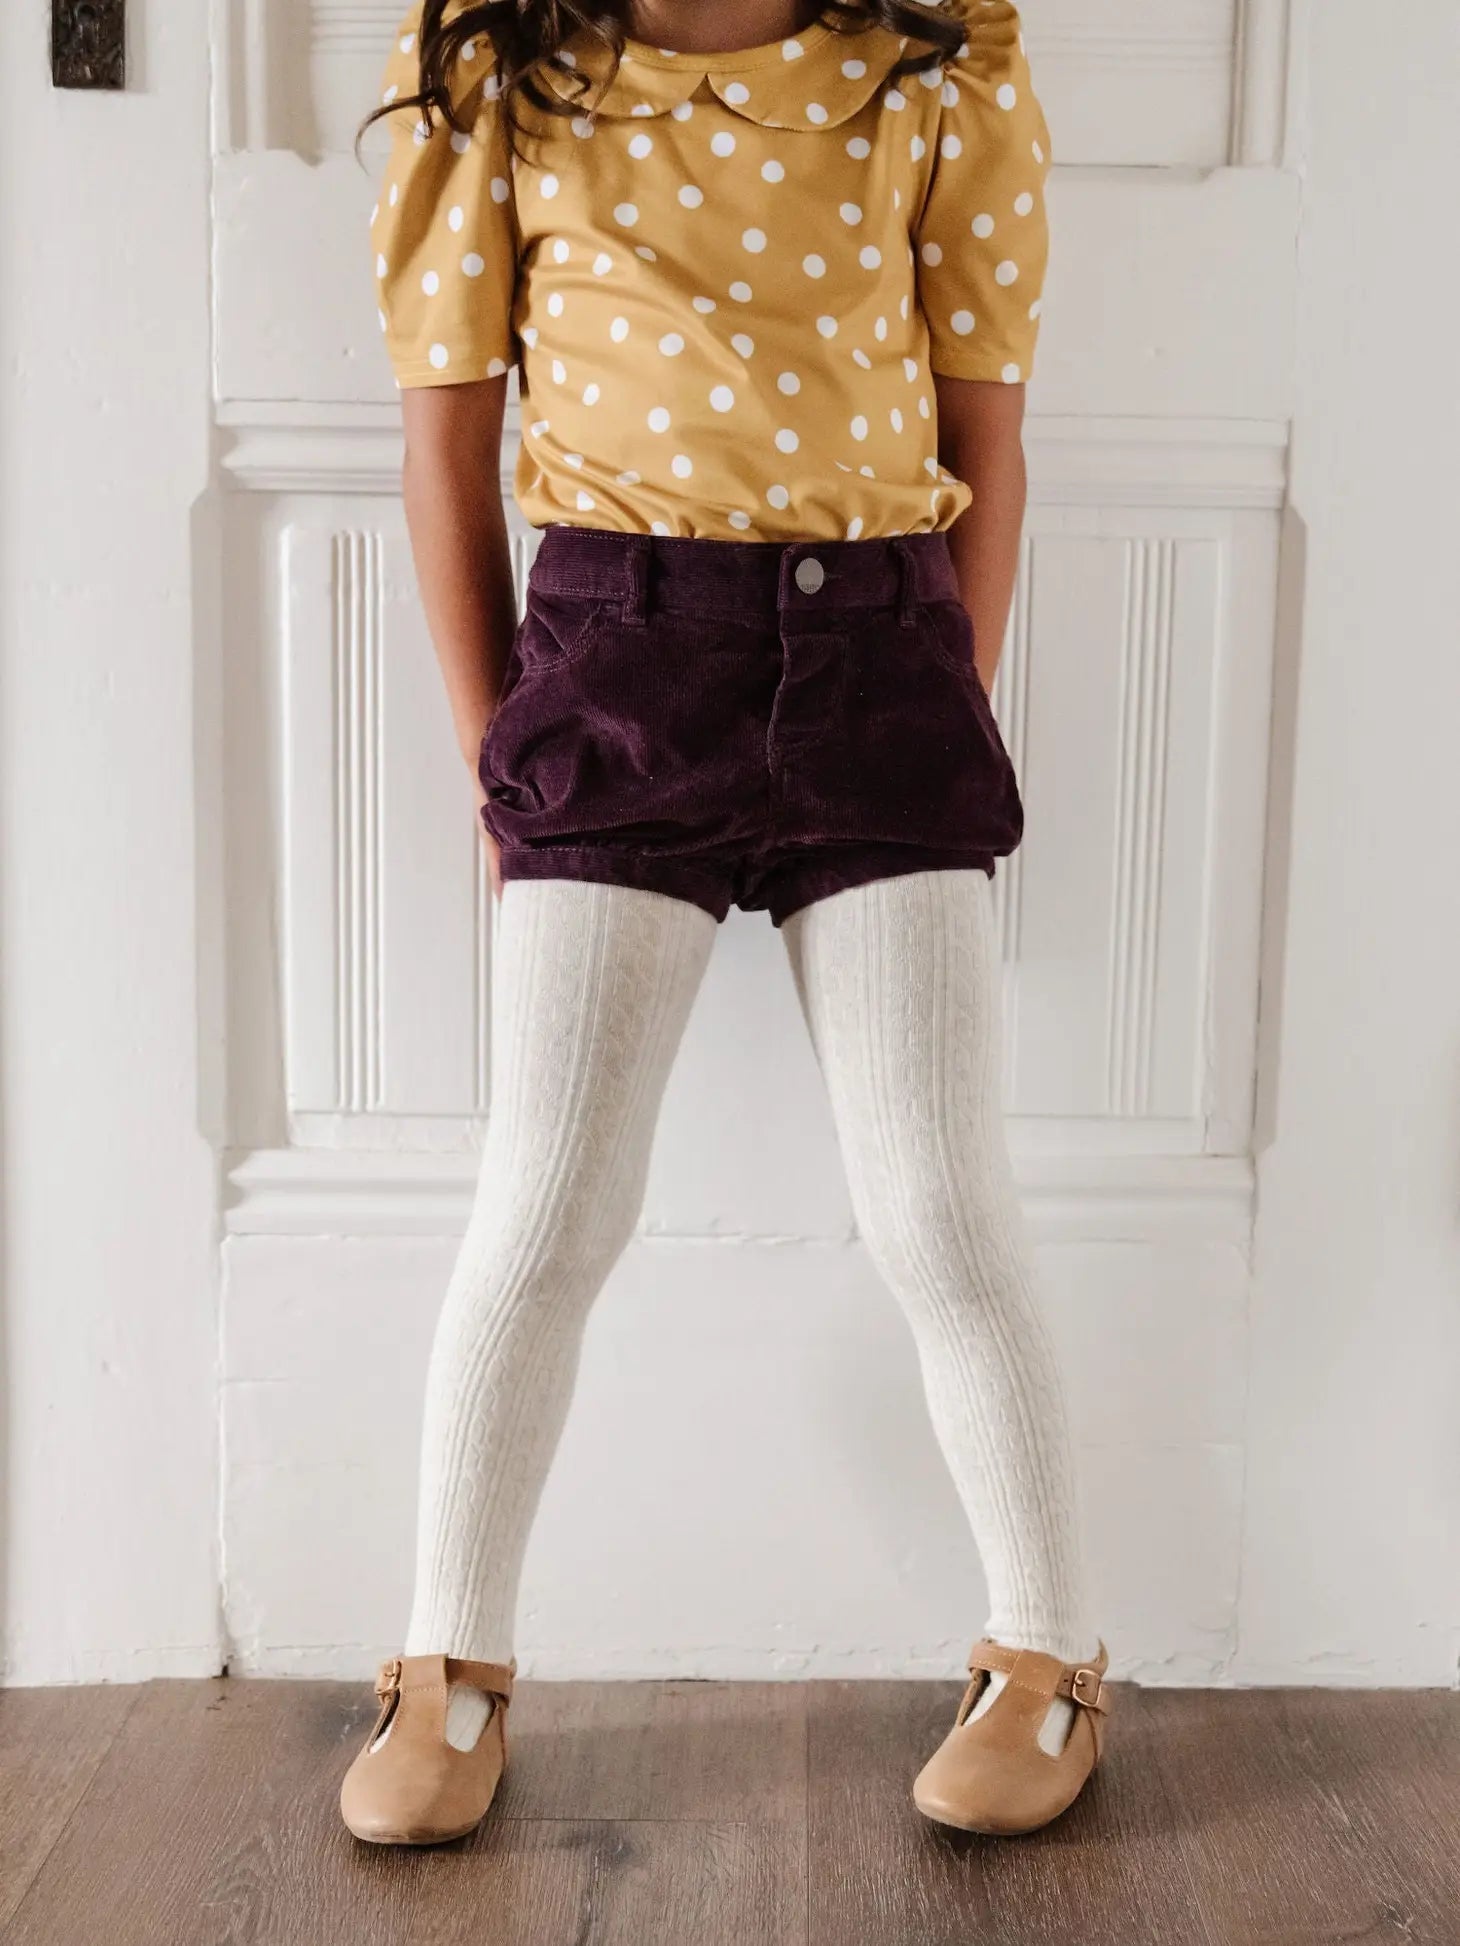 Heathered Ivory | Cable Knit Tights | Babies Toddlers & Girls